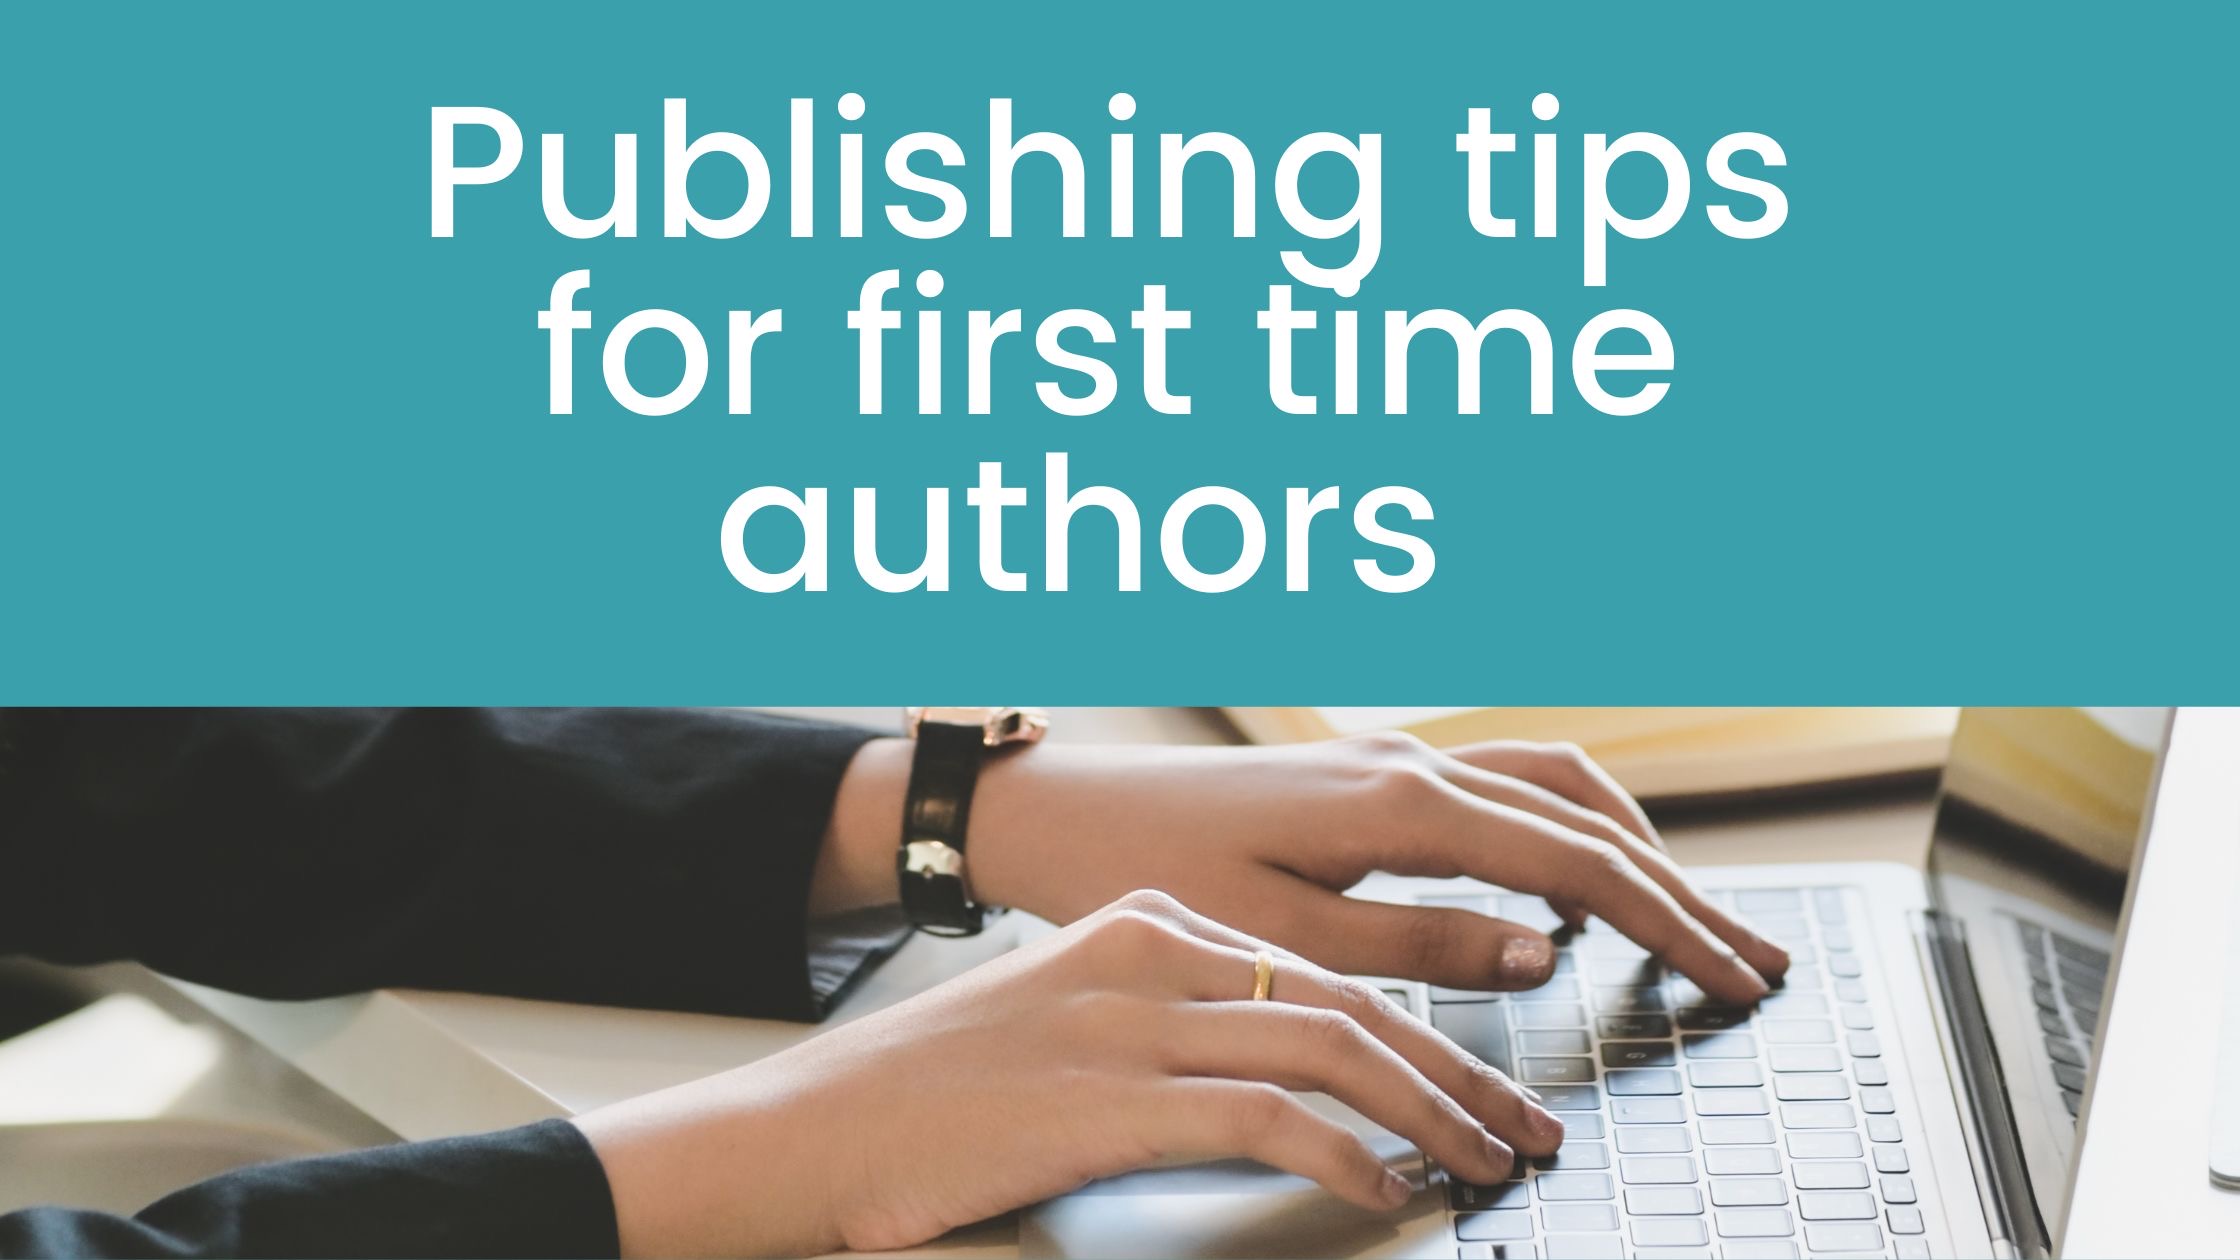 Publishing tips for first time Authors